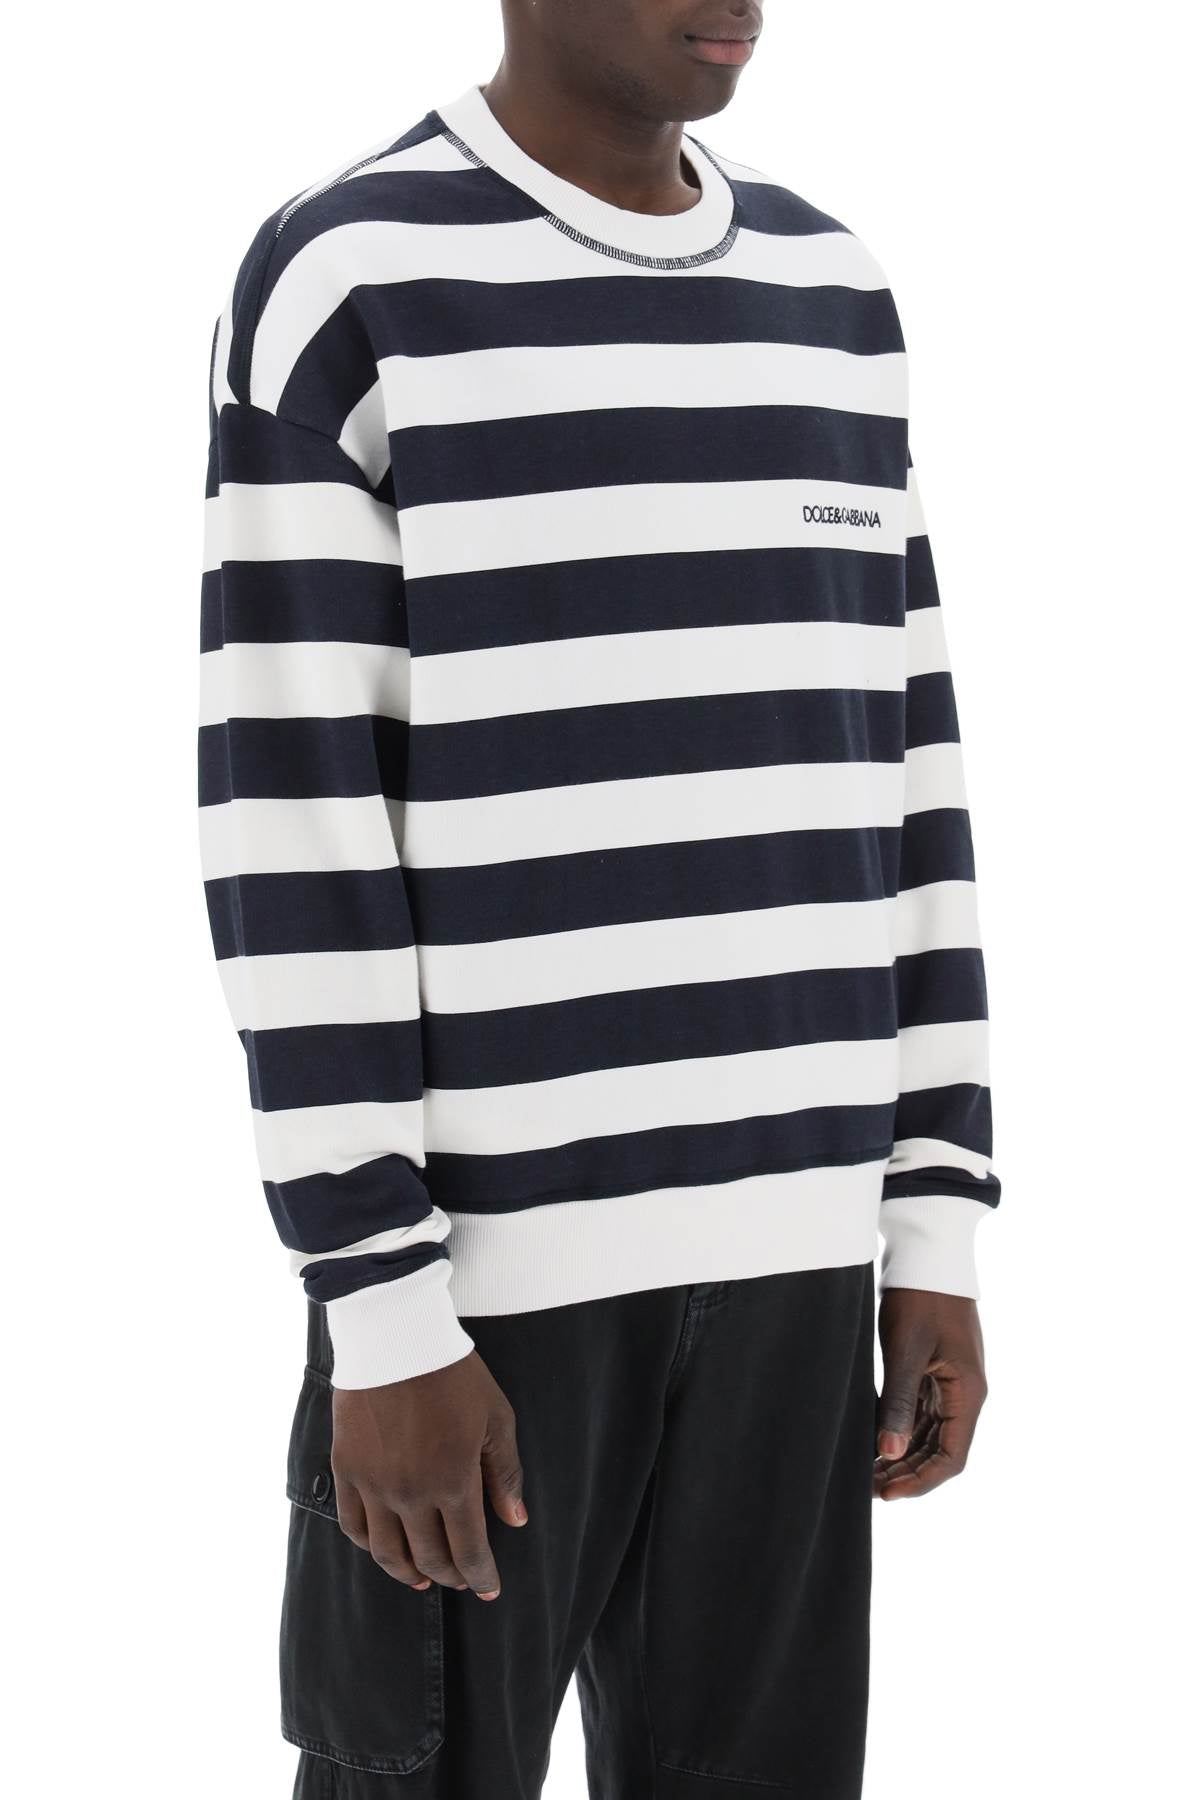 Shop Dolce & Gabbana Nautical-inspired Striped Men's Sweatshirt With Embroidered Logo In Multicolor